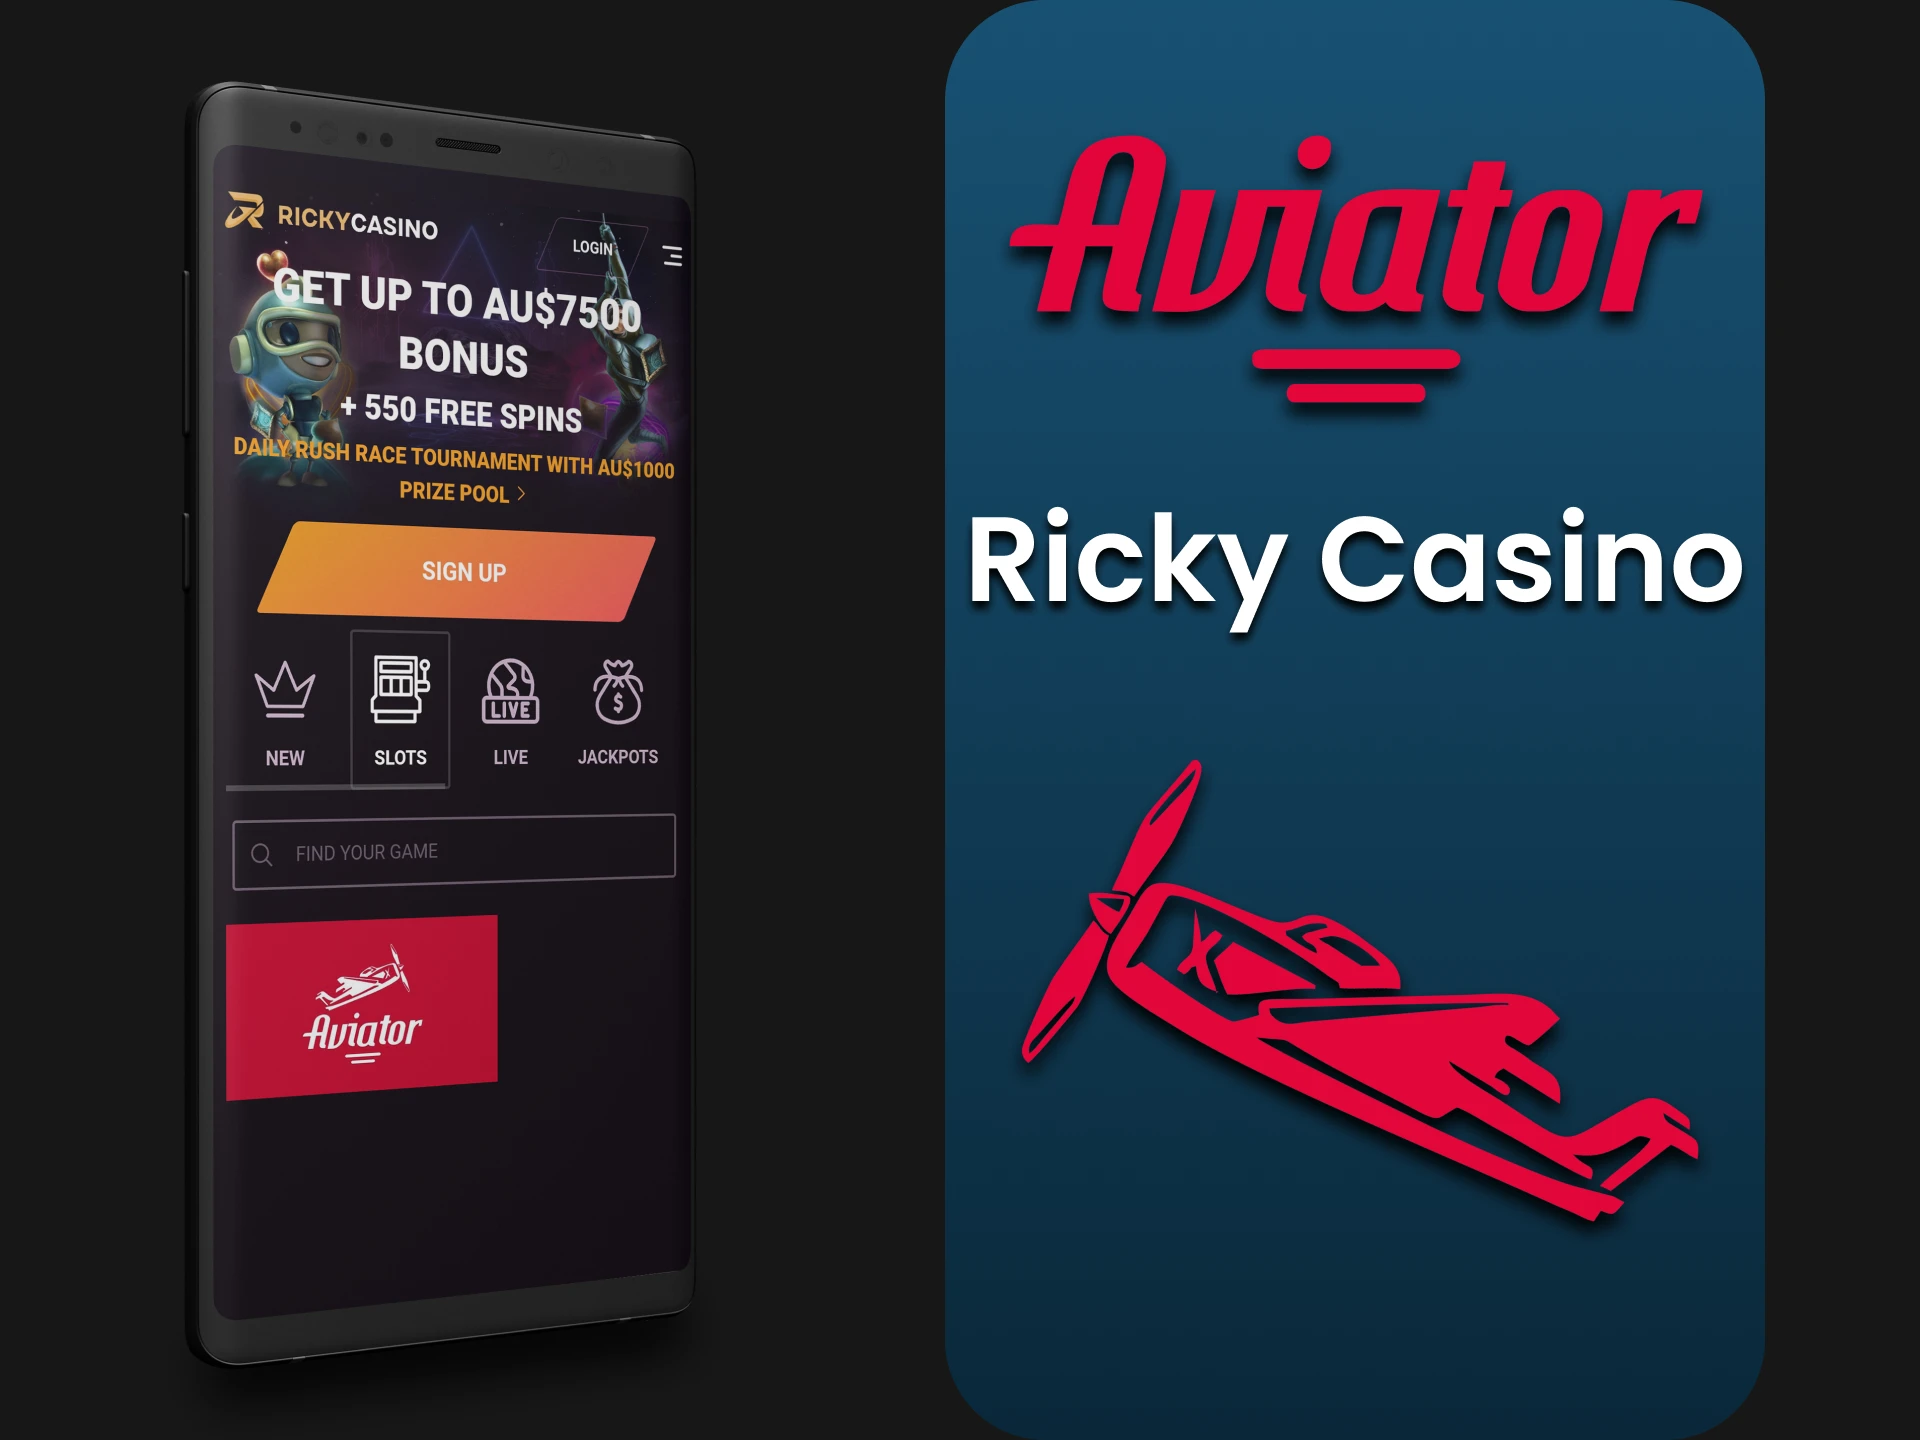 Download the Ricky app to play Aviator.